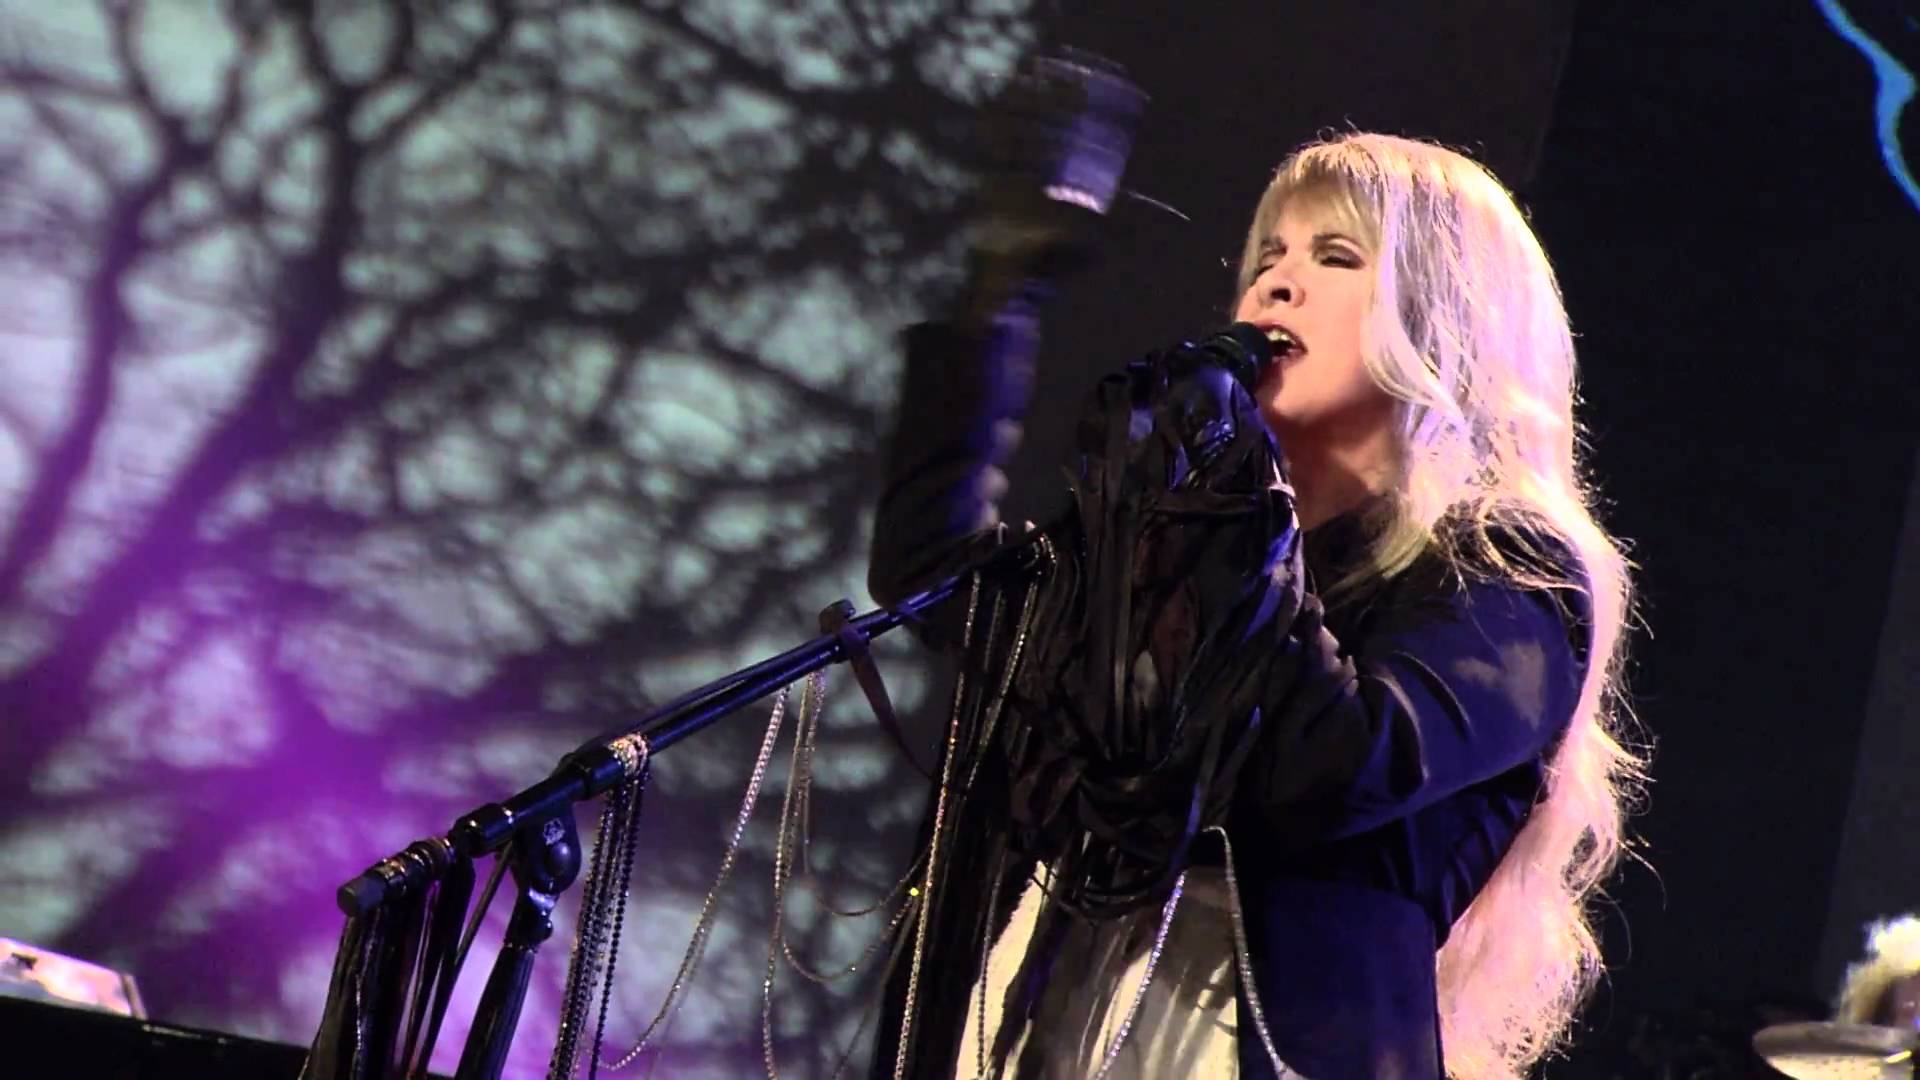 Stevie Nicks says she will never retire plans to stay young